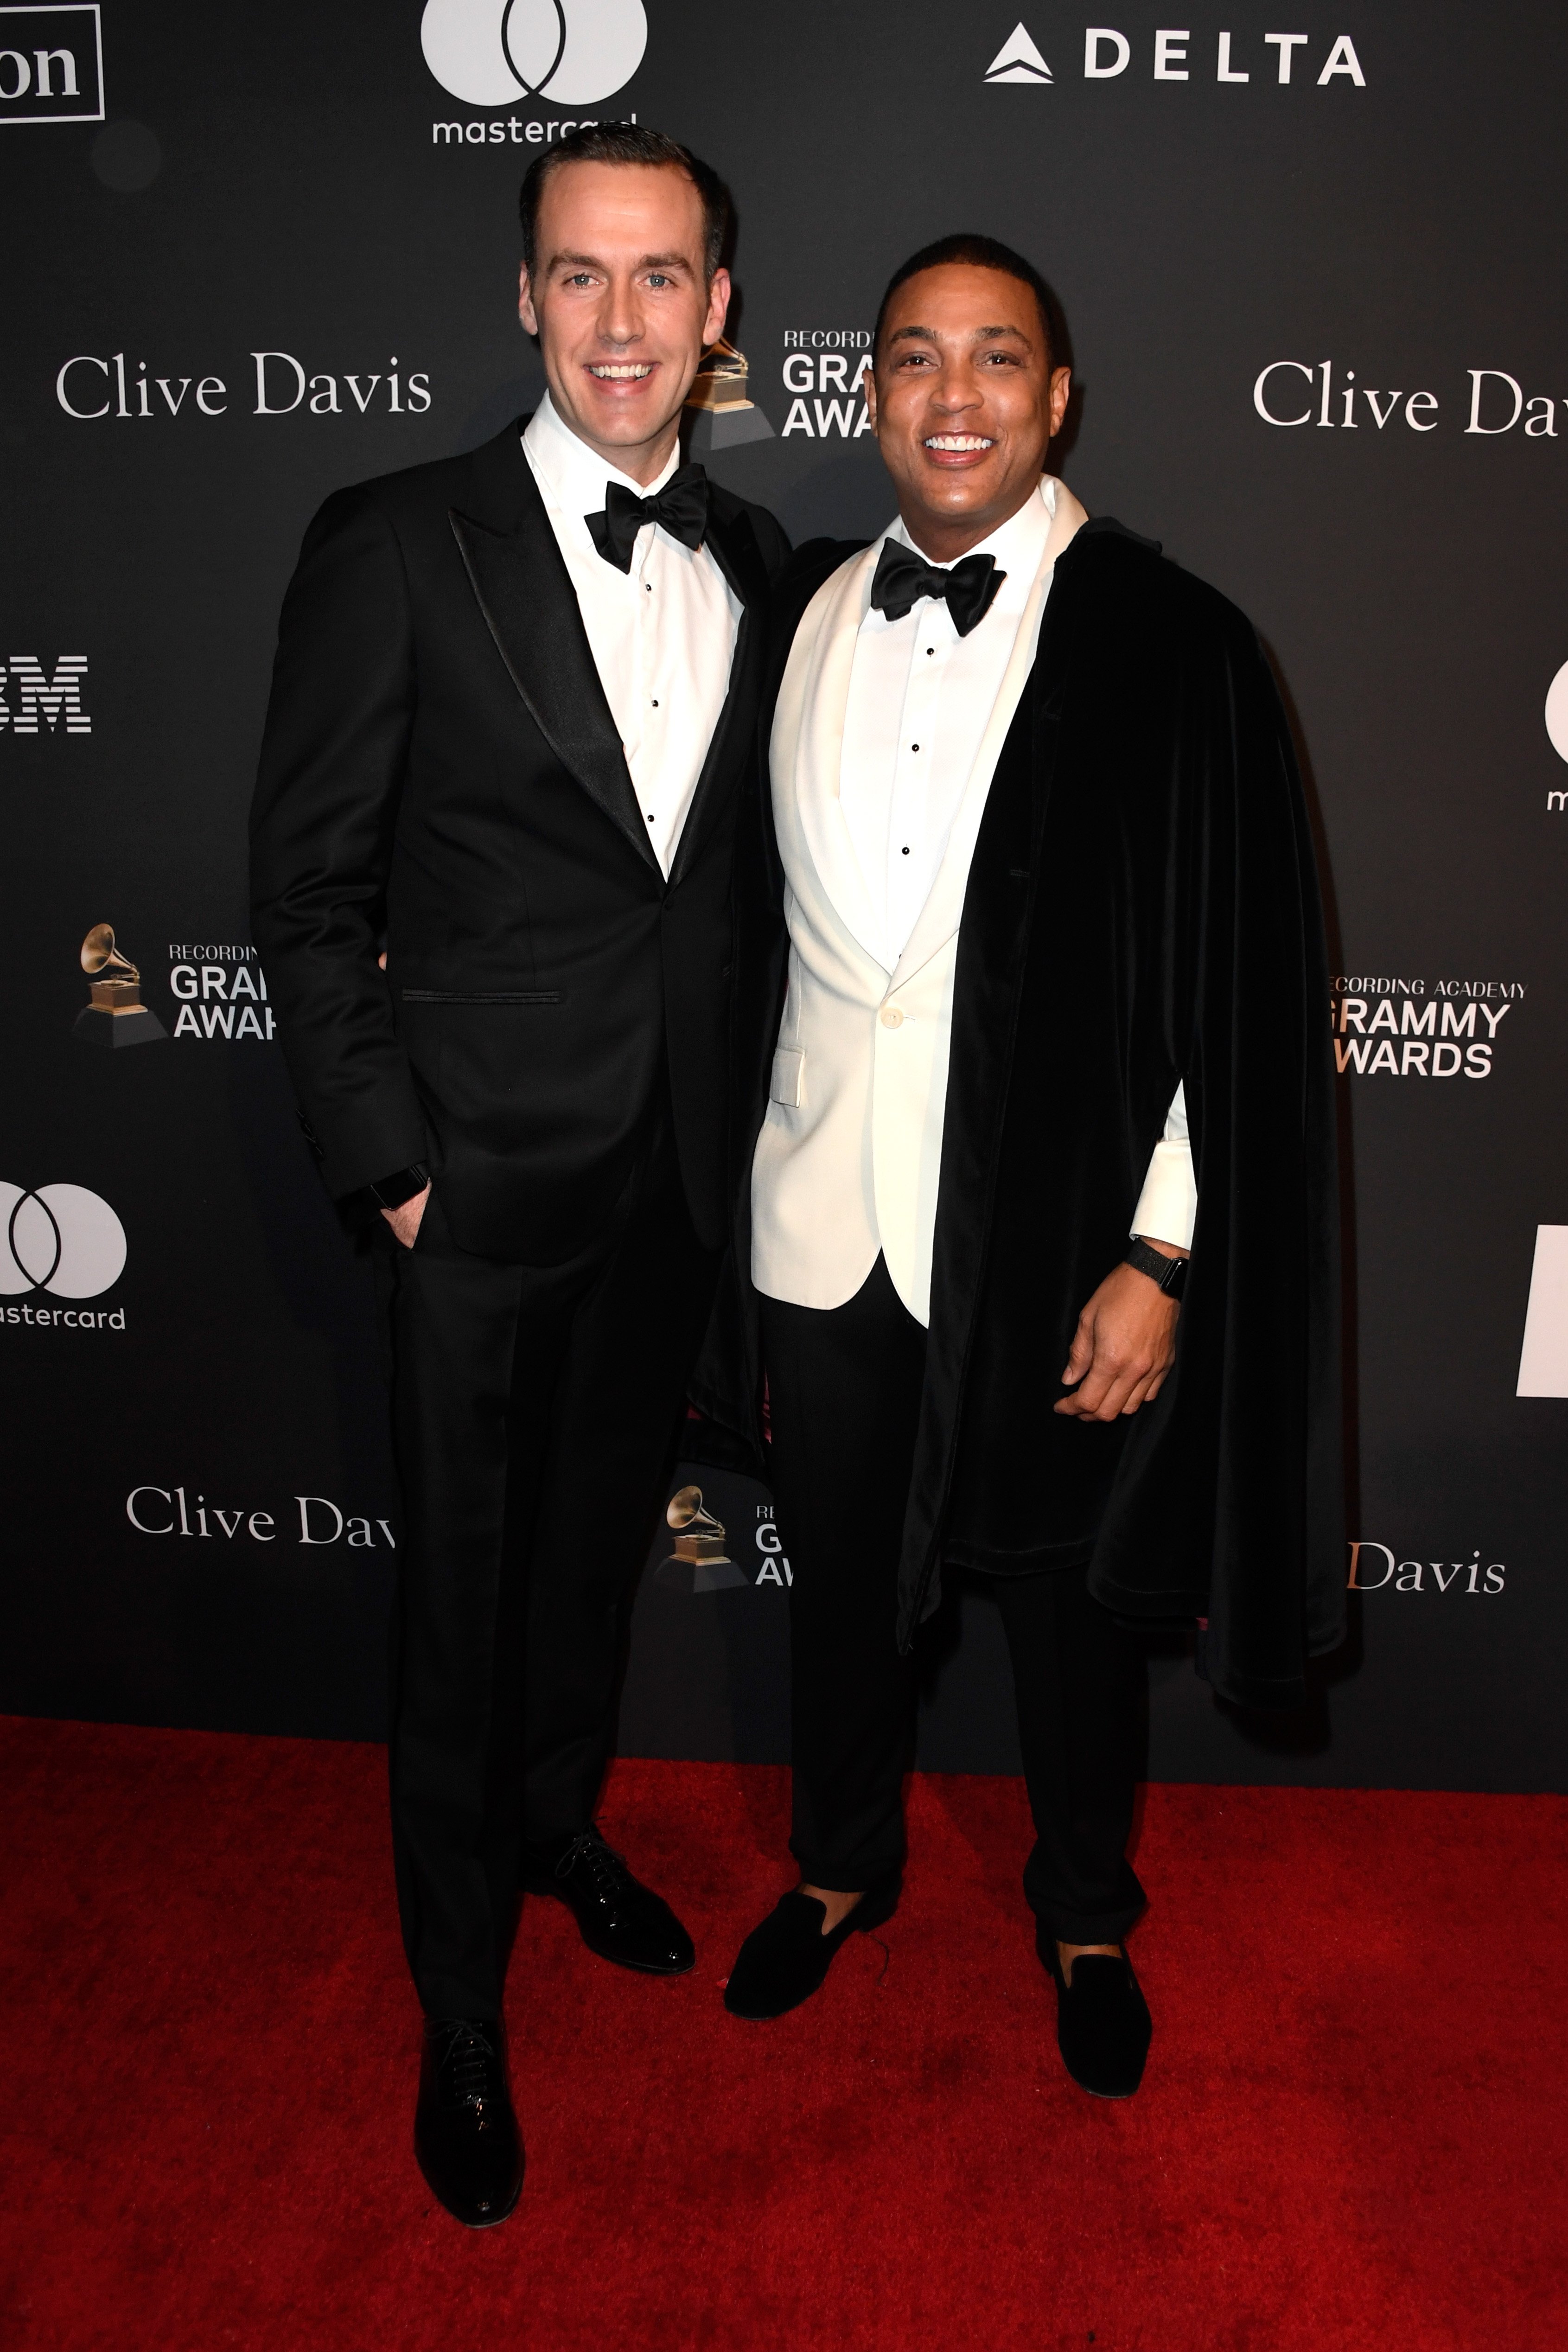 Tim Malone and Don Lemon attend the Pre-Grammy Gala in Beverly Hills, California on February 9, 2019 | Photo: Getty Images